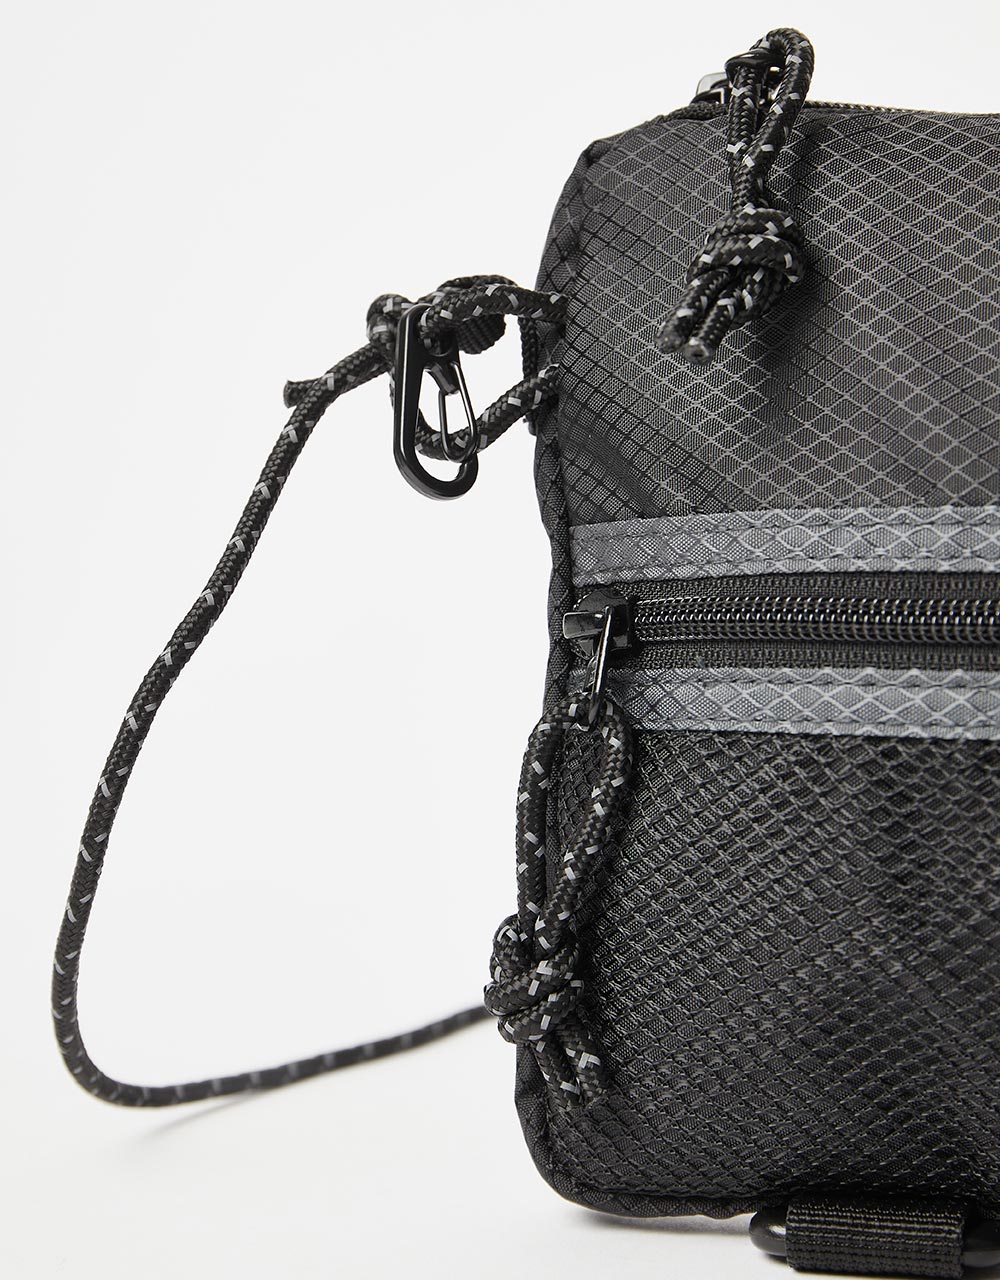 Route One Technical Cross Body Bag - Black